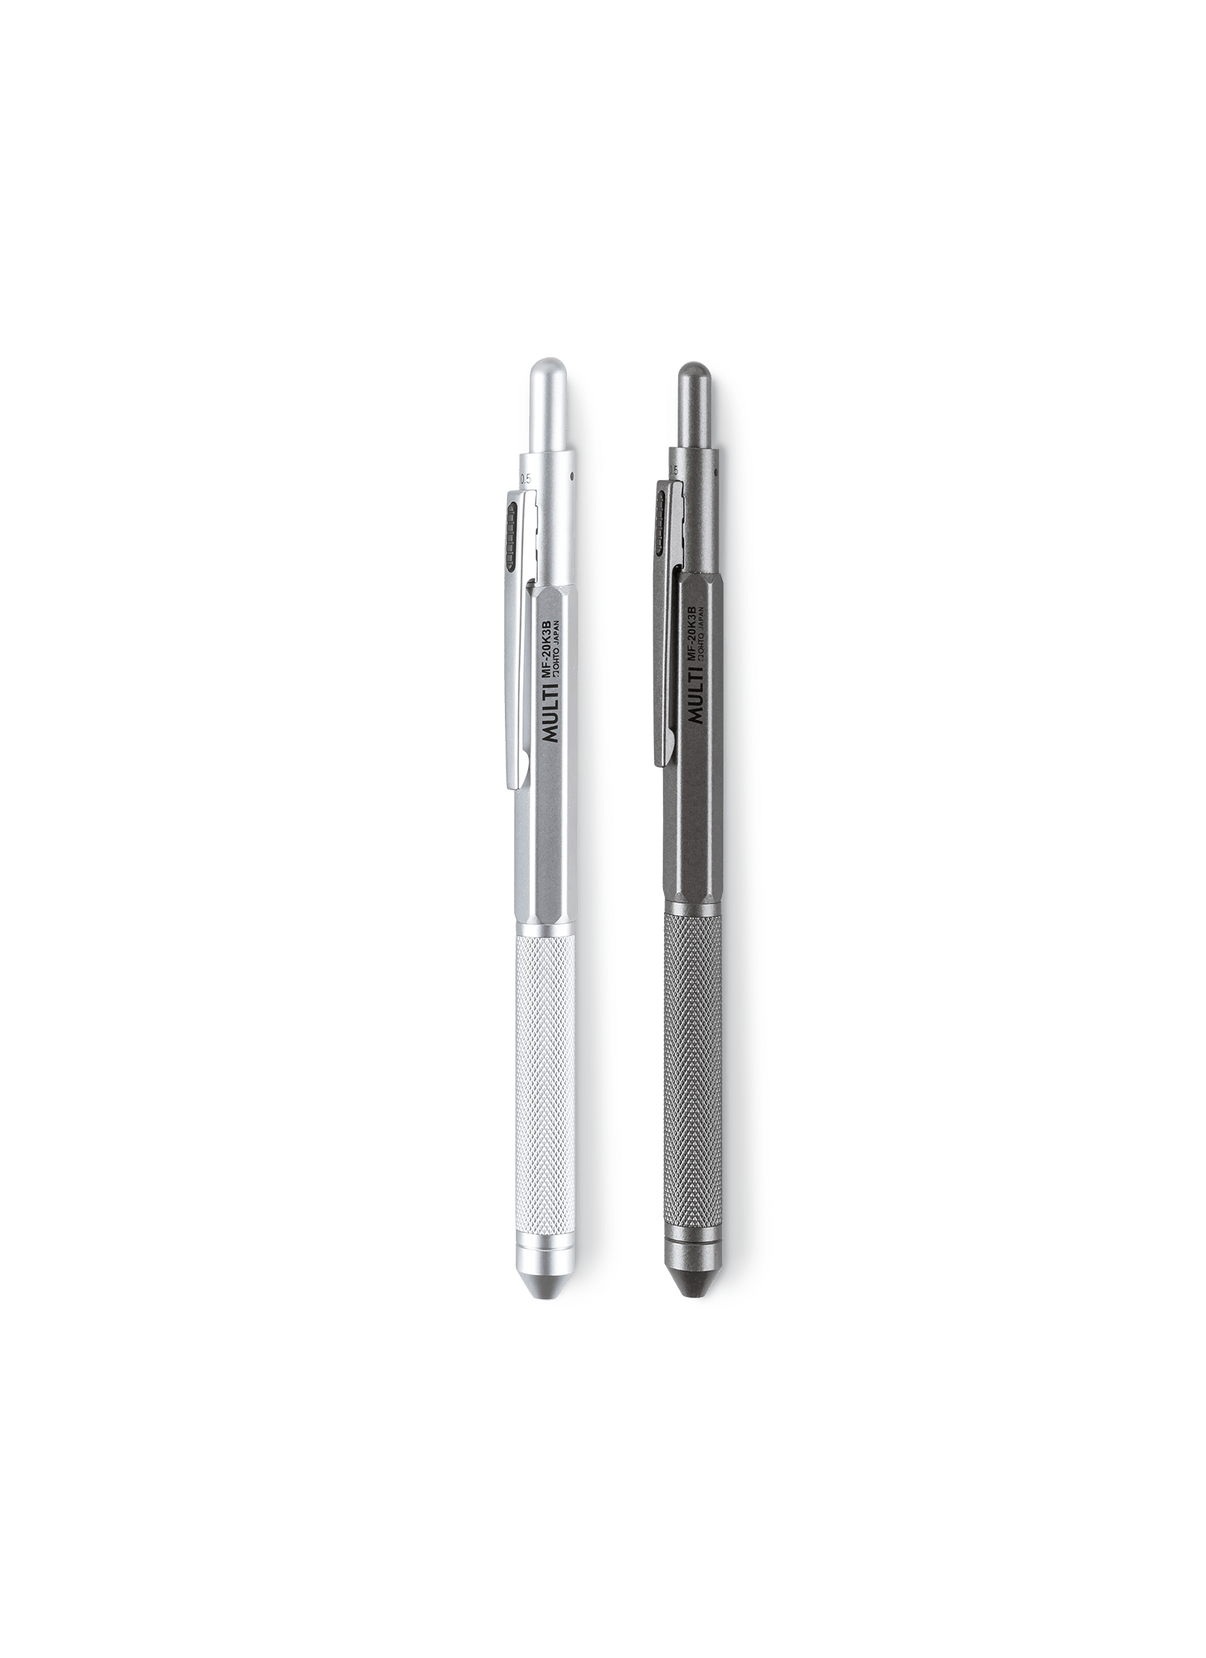 OHTO 2+1 Pen and Pencil in Silver and Gunmetal